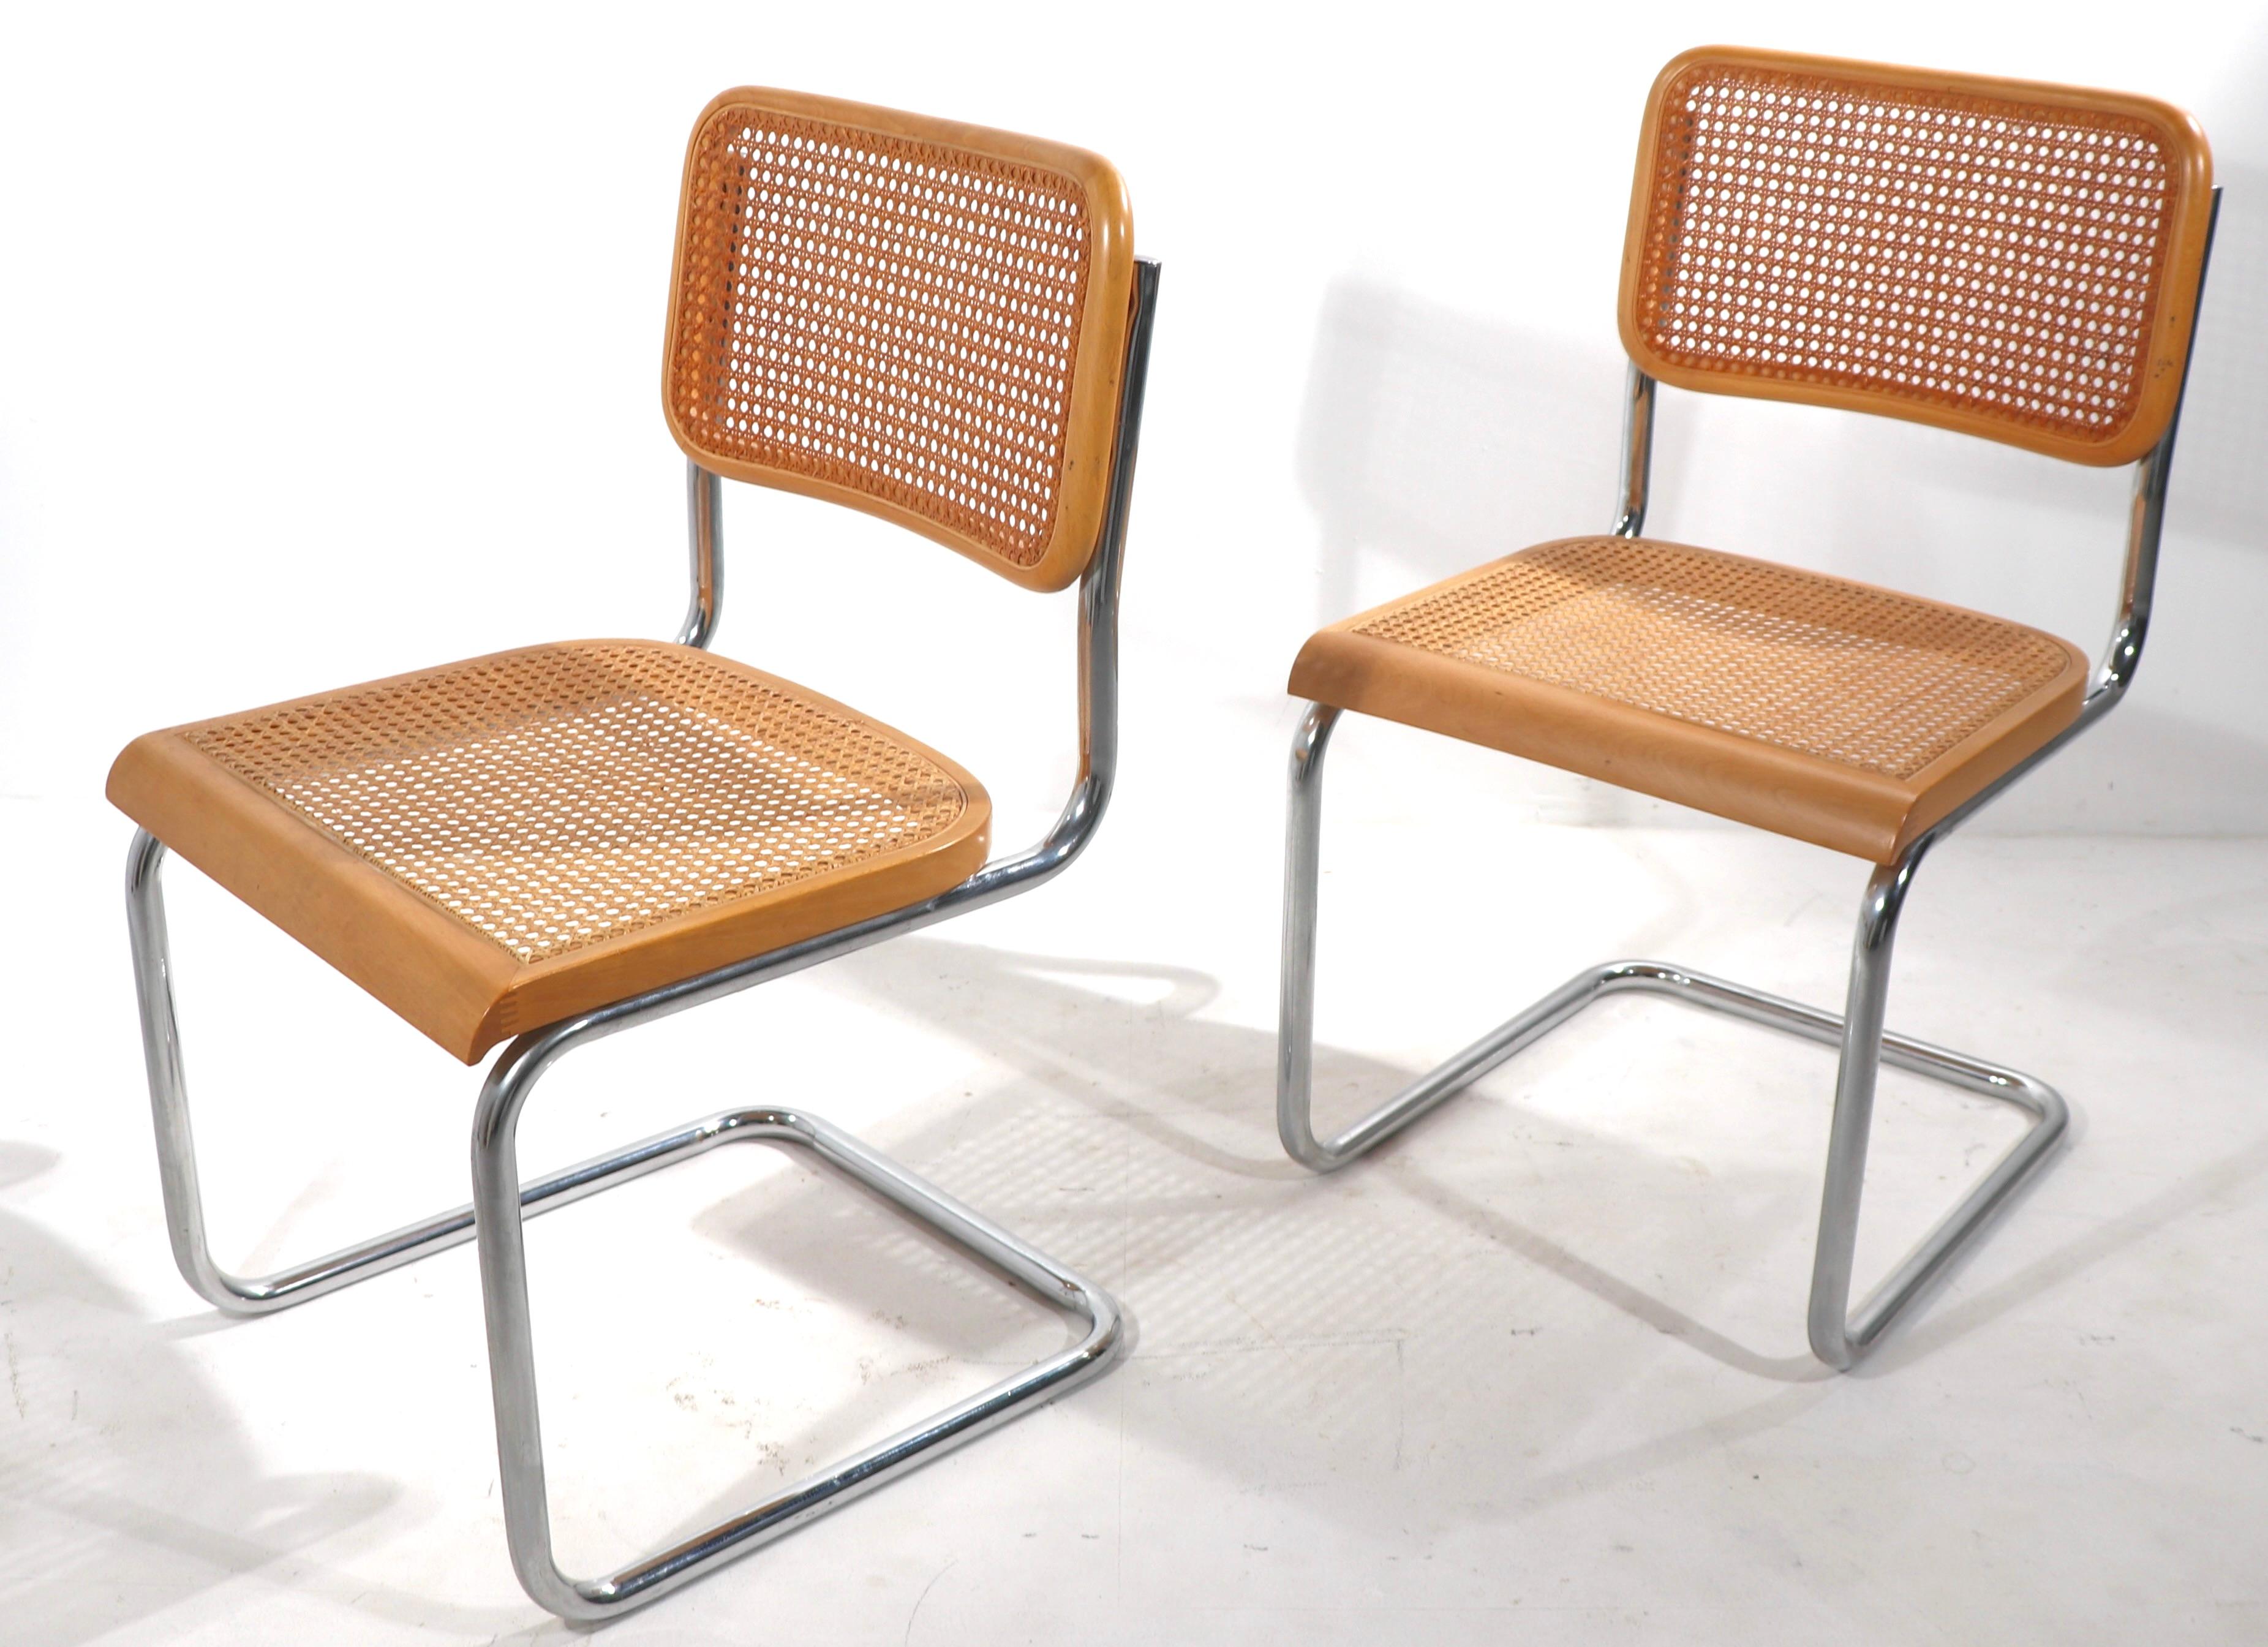 Nice pair of Marcel Breuer designed cantilevered dining height chairs, having beech wood and caned seat and back rests, on cantilevered chrome continuous leg frames. The chairs are in clean, original, estate condition, showing only light cosmetic